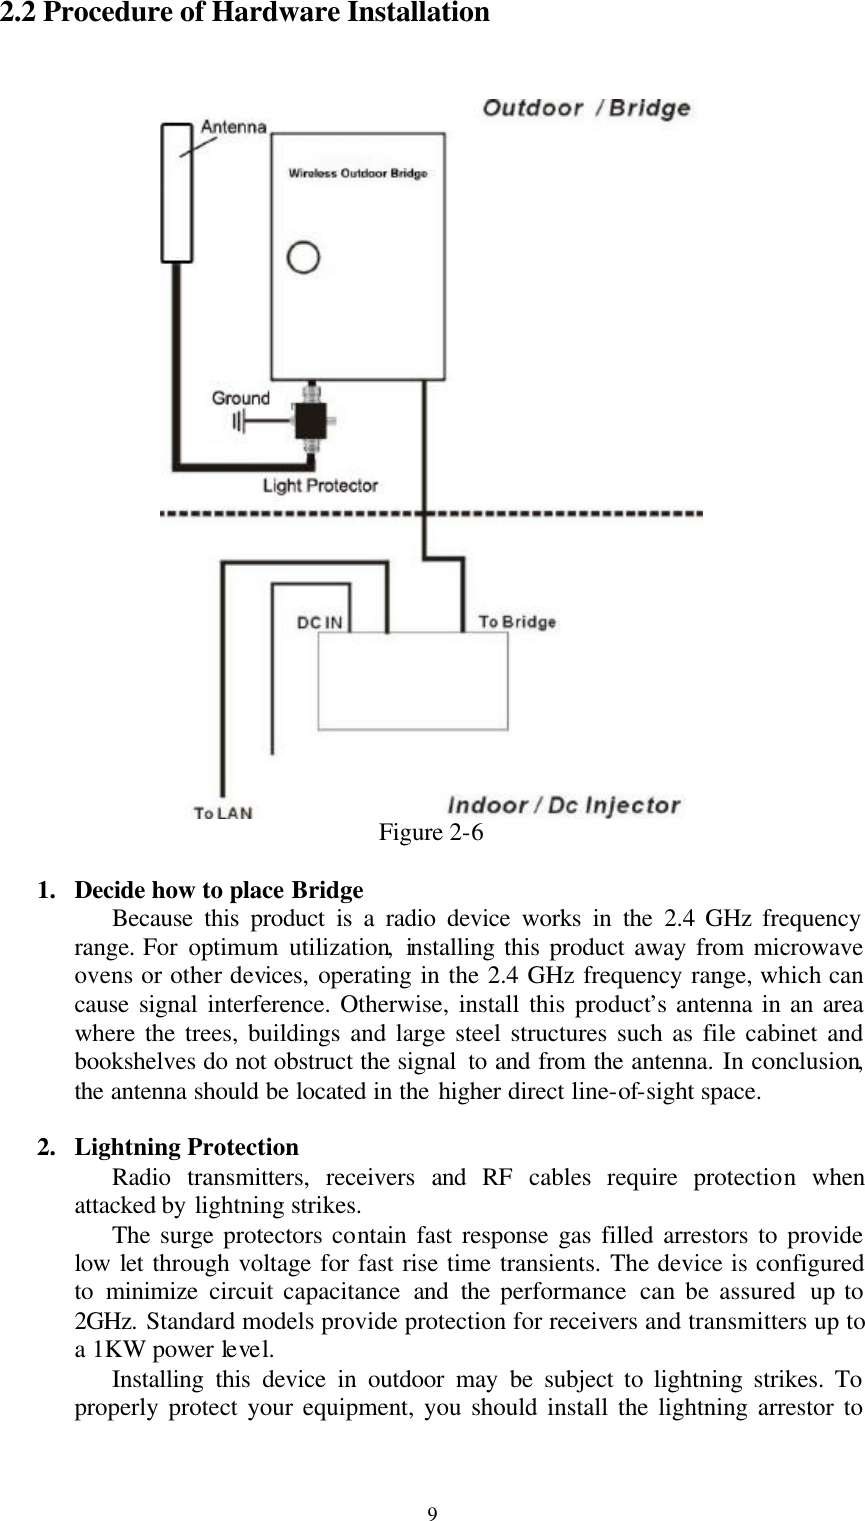  9 2.2 Procedure of Hardware Installation   Figure 2-6  1. Decide how to place Bridge Because this product is a radio device works in the 2.4 GHz frequency range. For optimum utilization, installing this product away from microwave ovens or other devices, operating in the 2.4 GHz frequency range, which can cause signal interference. Otherwise, install this product’s antenna in an area where the trees, buildings and large steel structures such as file cabinet and bookshelves do not obstruct the signal  to and from the antenna. In conclusion, the antenna should be located in the higher direct line-of-sight space.  2. Lightning Protection Radio transmitters, receivers and RF cables require protection when attacked by lightning strikes. The surge protectors contain fast response gas filled arrestors to provide low let through voltage for fast rise time transients. The device is configured to  minimize circuit capacitance and the performance  can be assured  up to 2GHz. Standard models provide protection for receivers and transmitters up to a 1KW power level. Installing this device in outdoor may be subject to lightning strikes. To properly protect your equipment, you should install the lightning arrestor to 